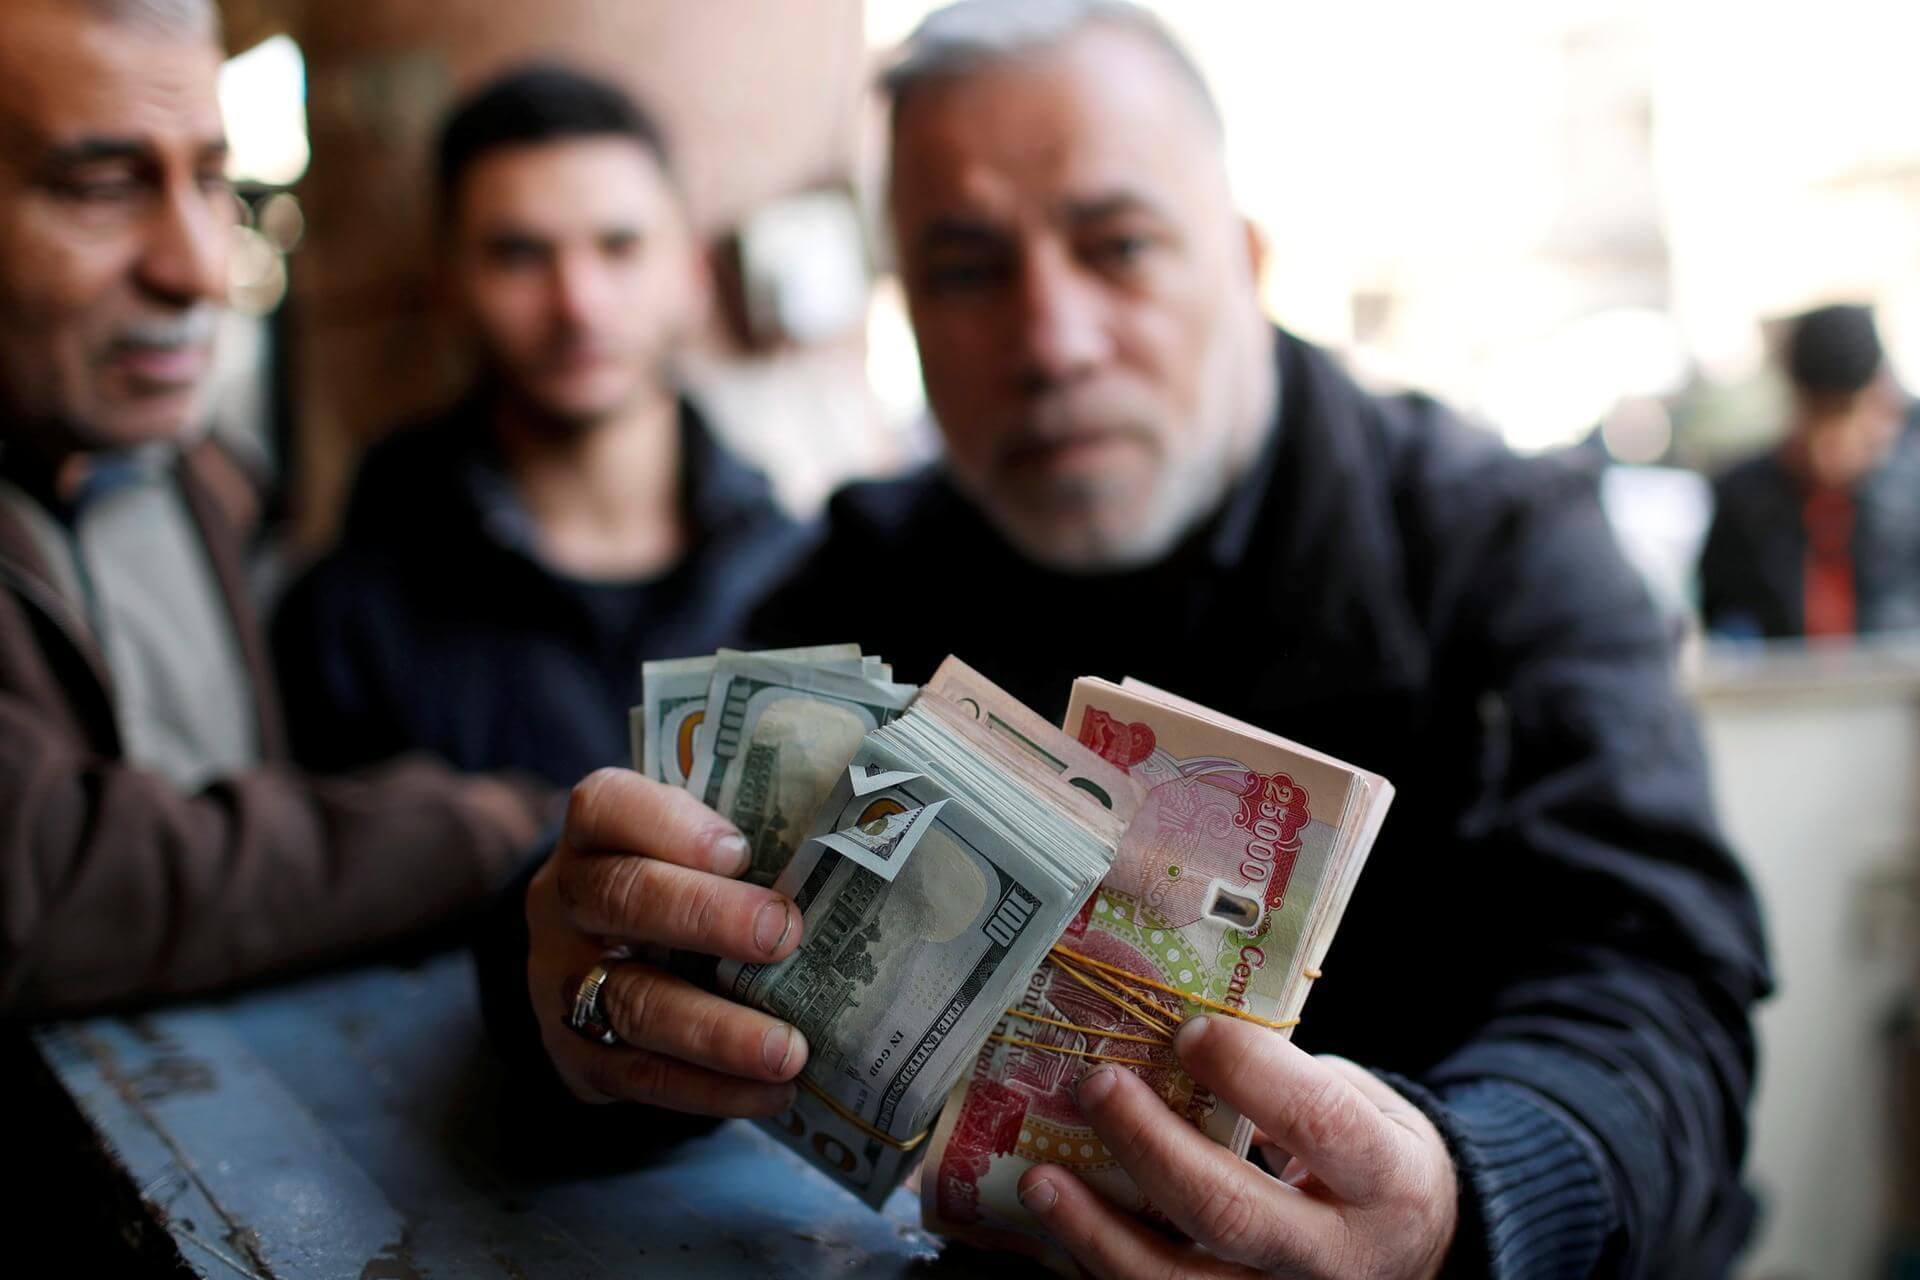 Iraq's forex reserves hit record high as oil prices soar